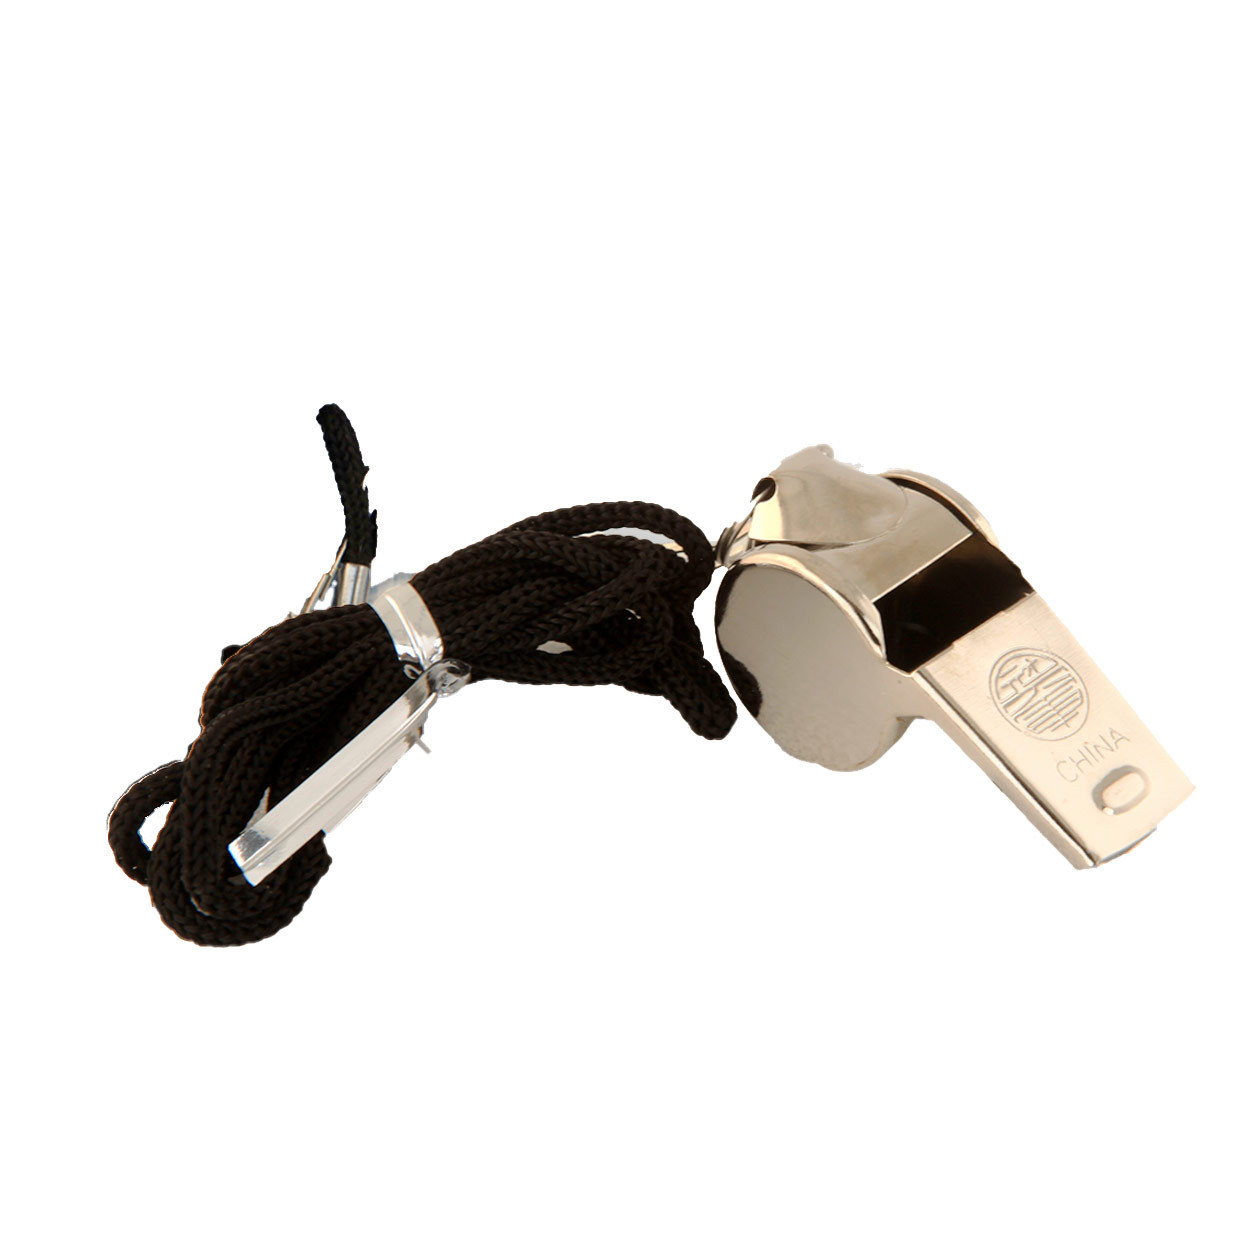 Metal referee whistle + cord